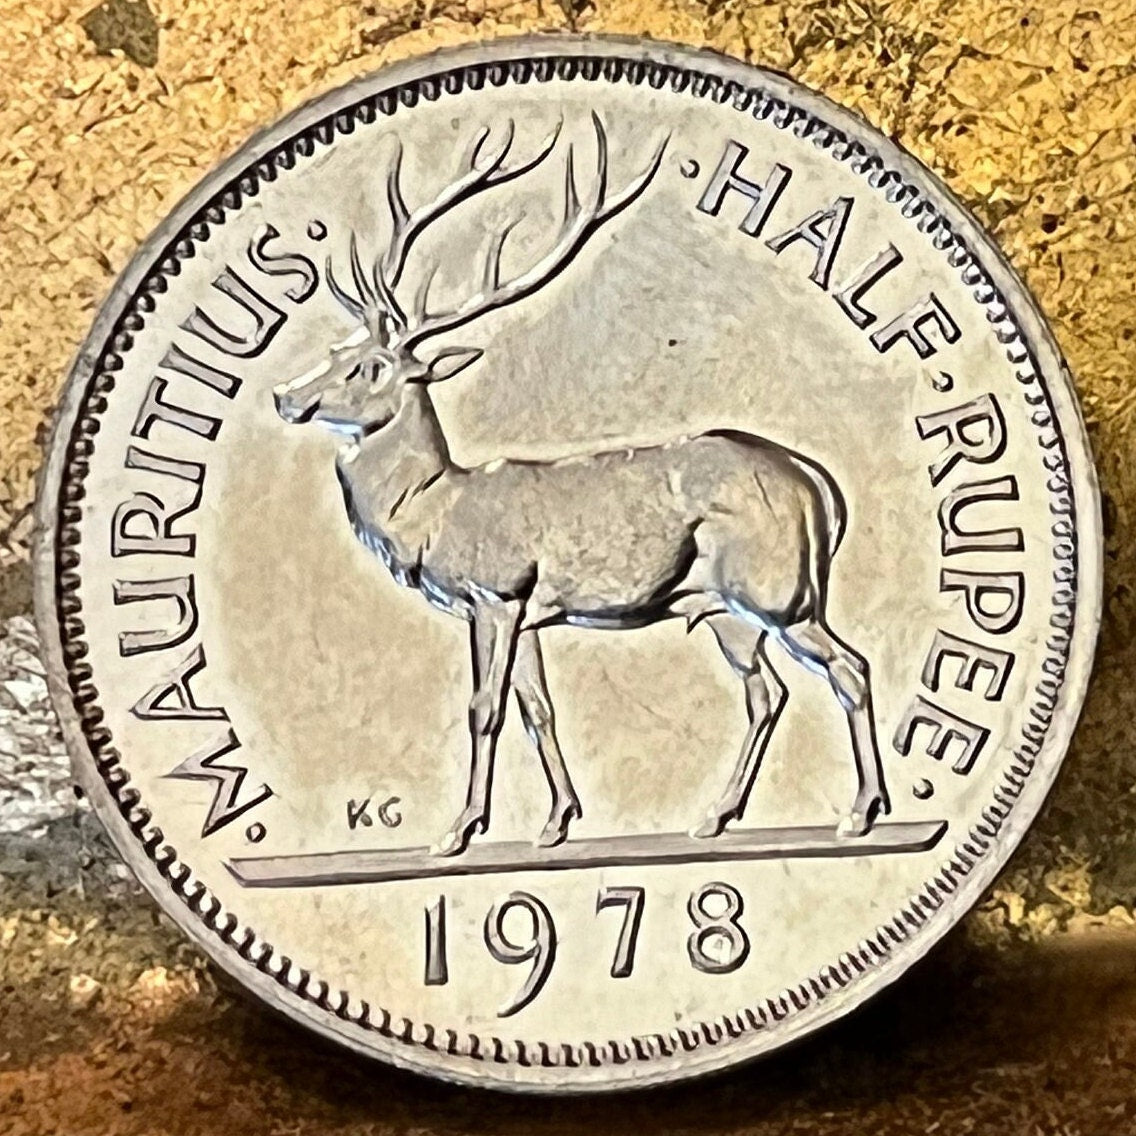 Swamp Deer Half Rupee Mauritius Authentic Coin Money for Jewelry and Craft Making (Barasingha Stag) (Tudor Crown) 1965